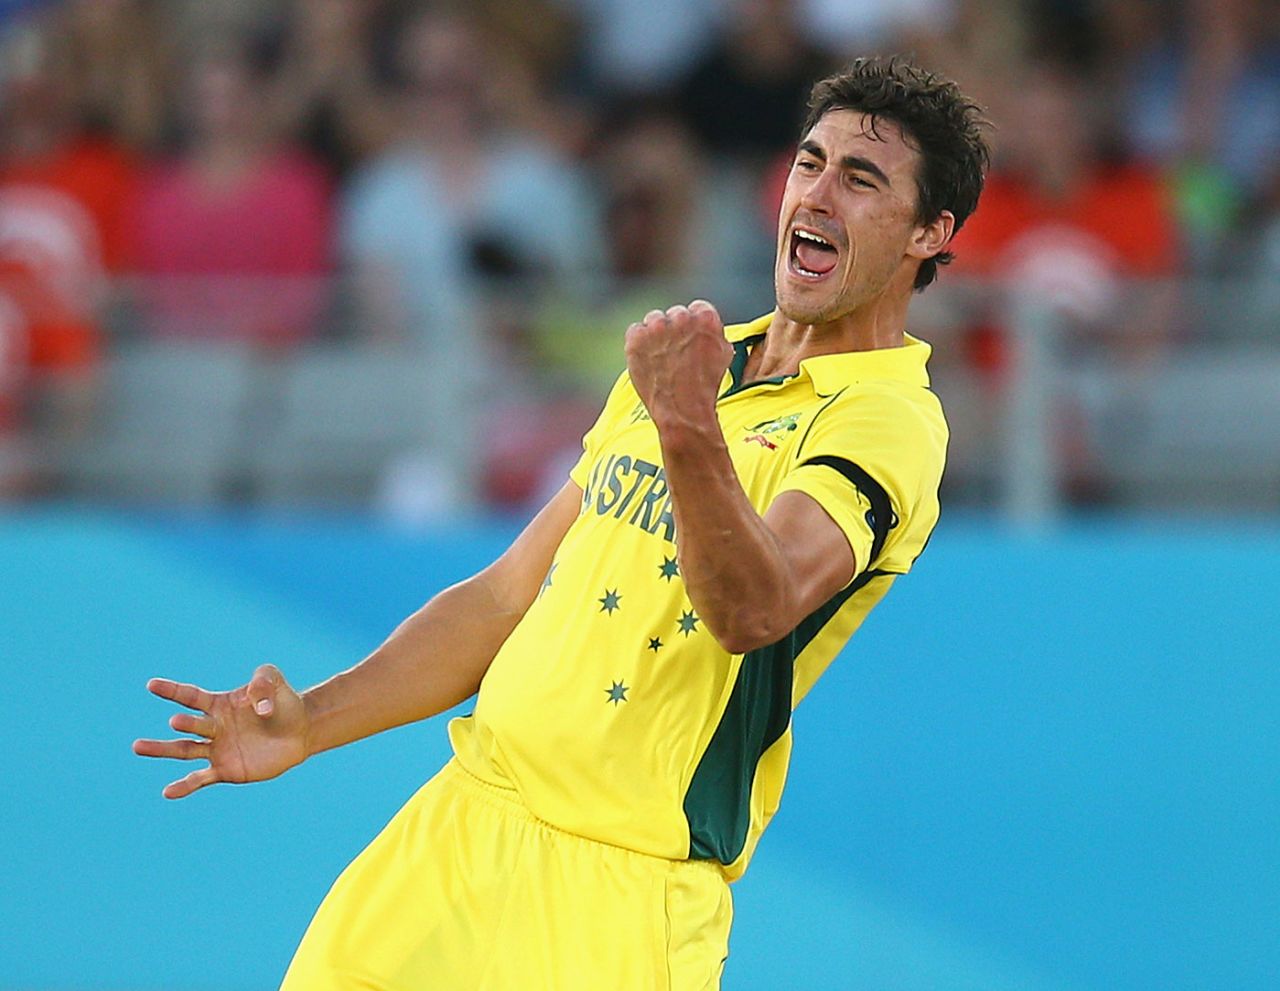 Mitchell Starc celebrates a wicket, New Zealand v Australia, World Cup 2015, Group A, Auckland, February 28, 2015